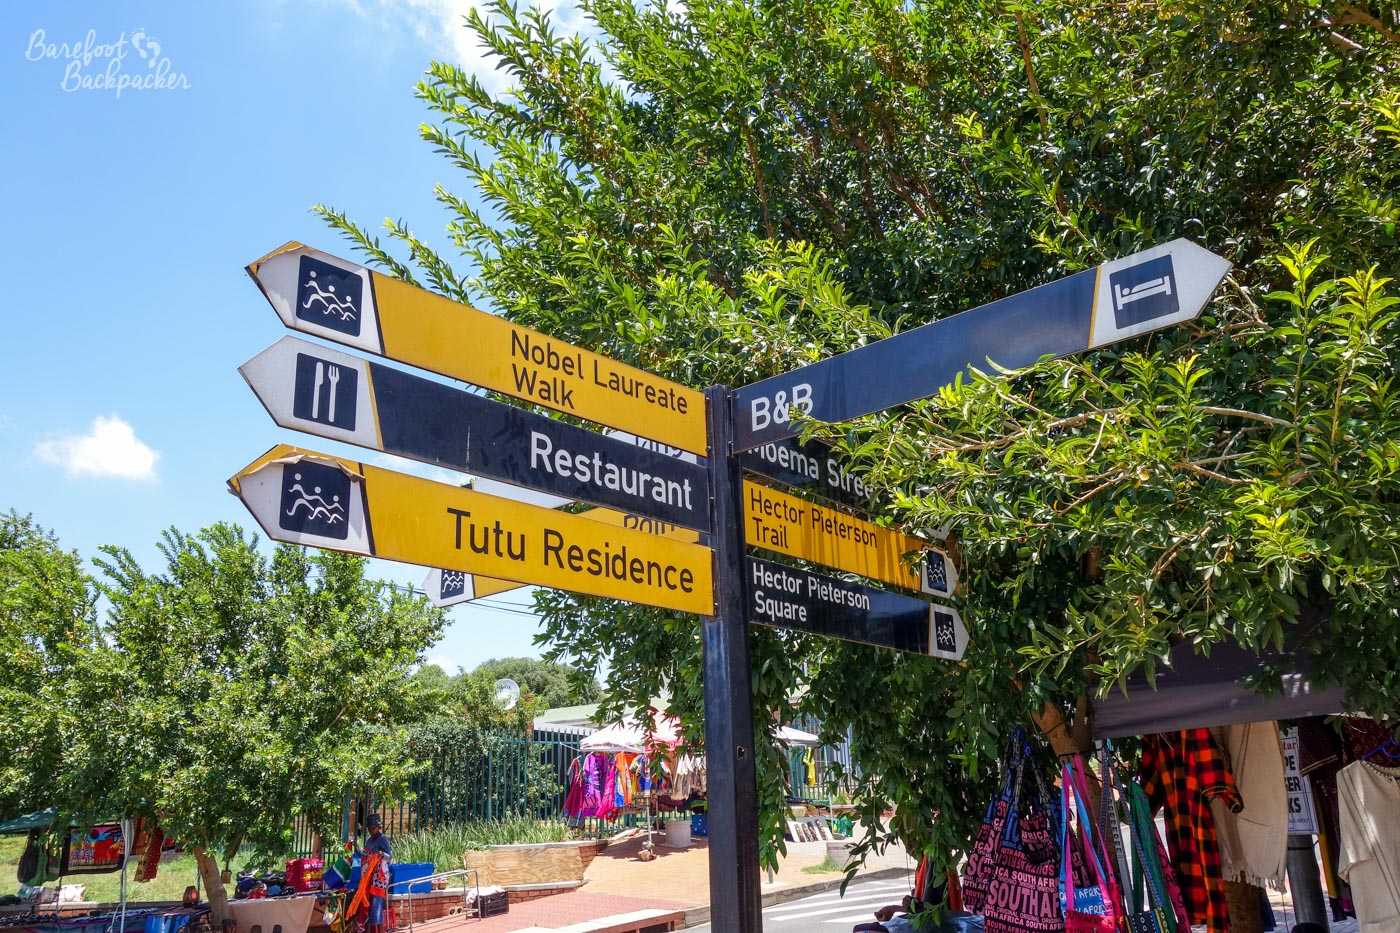 Signpost in central Soweto showing directions to Tutu's House and Hector Pieterson Memorial, amongst other things